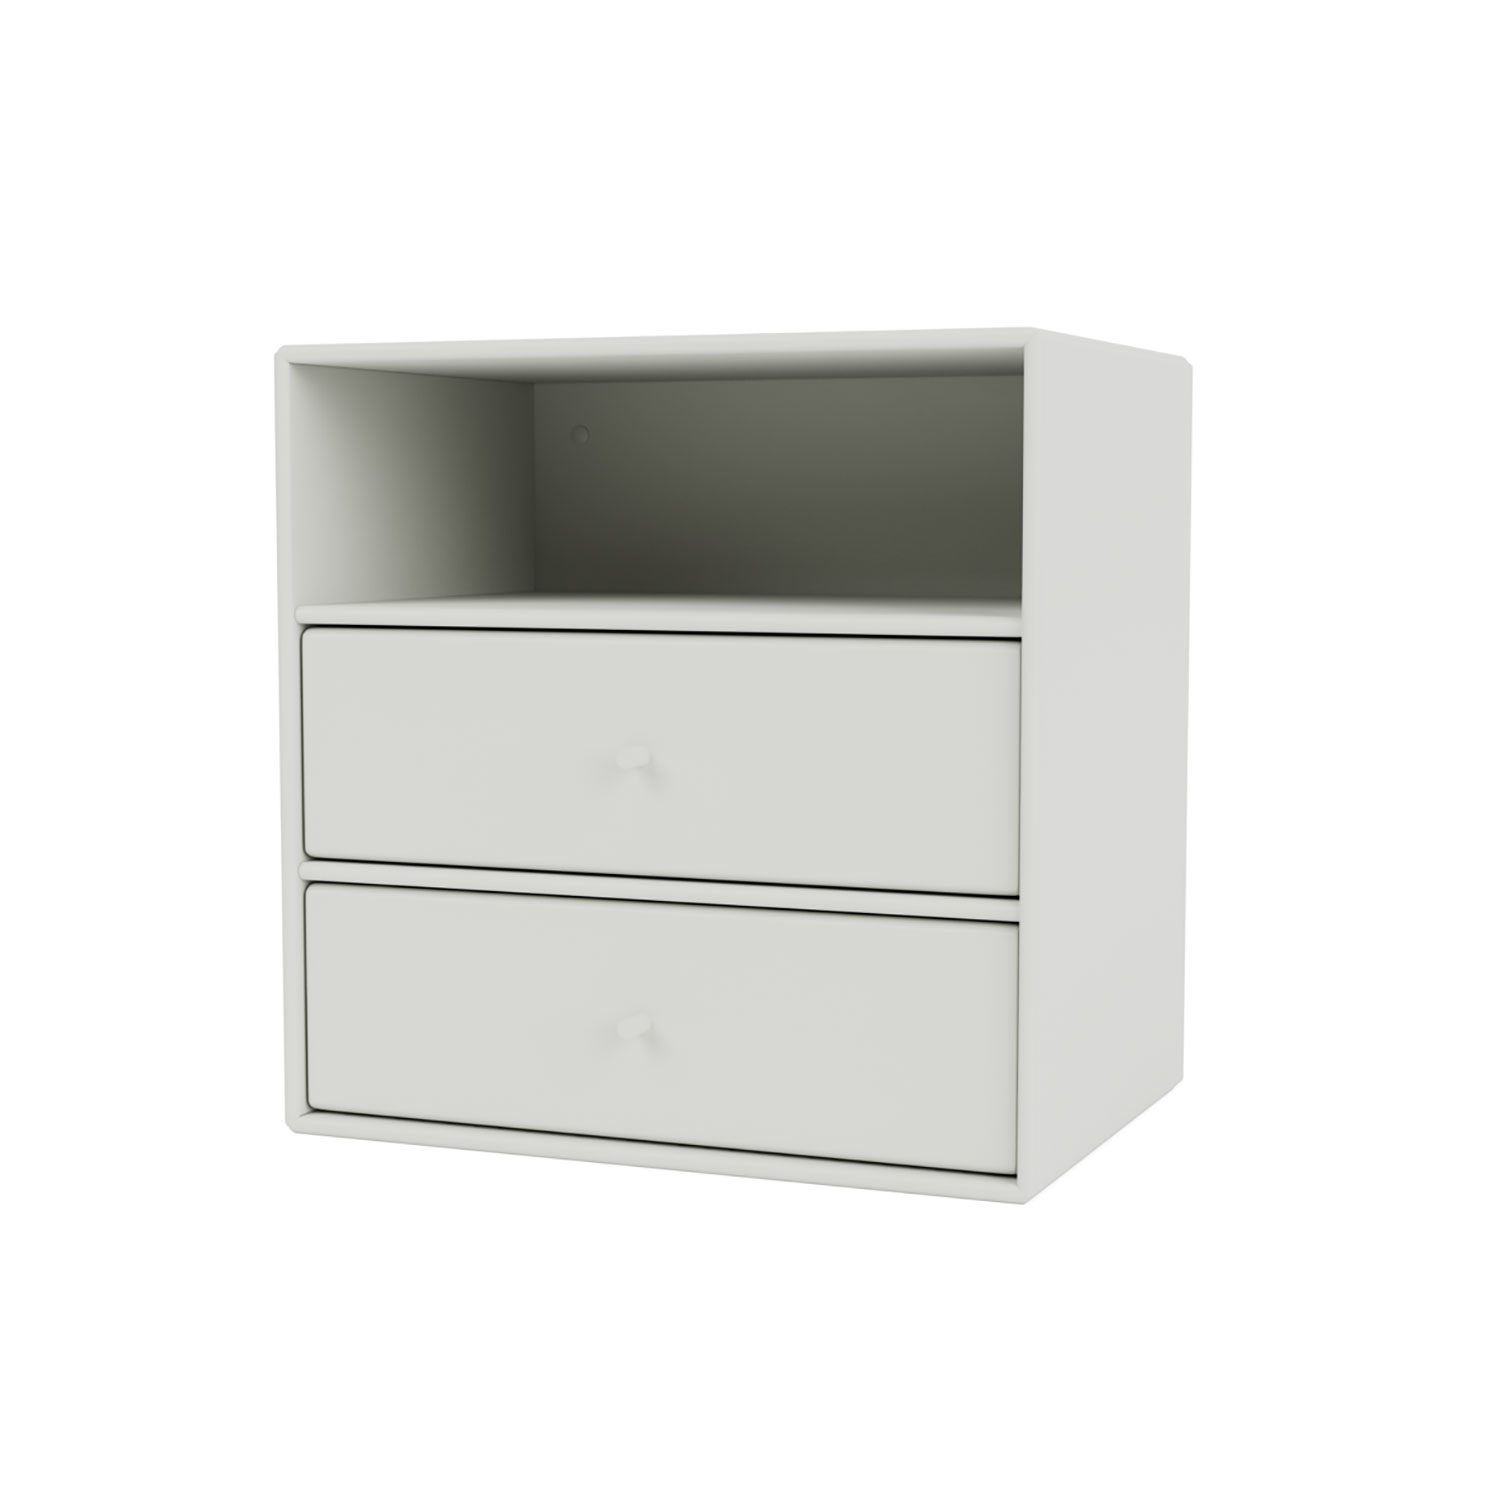 Mini 1006 with two drawers, Nordic